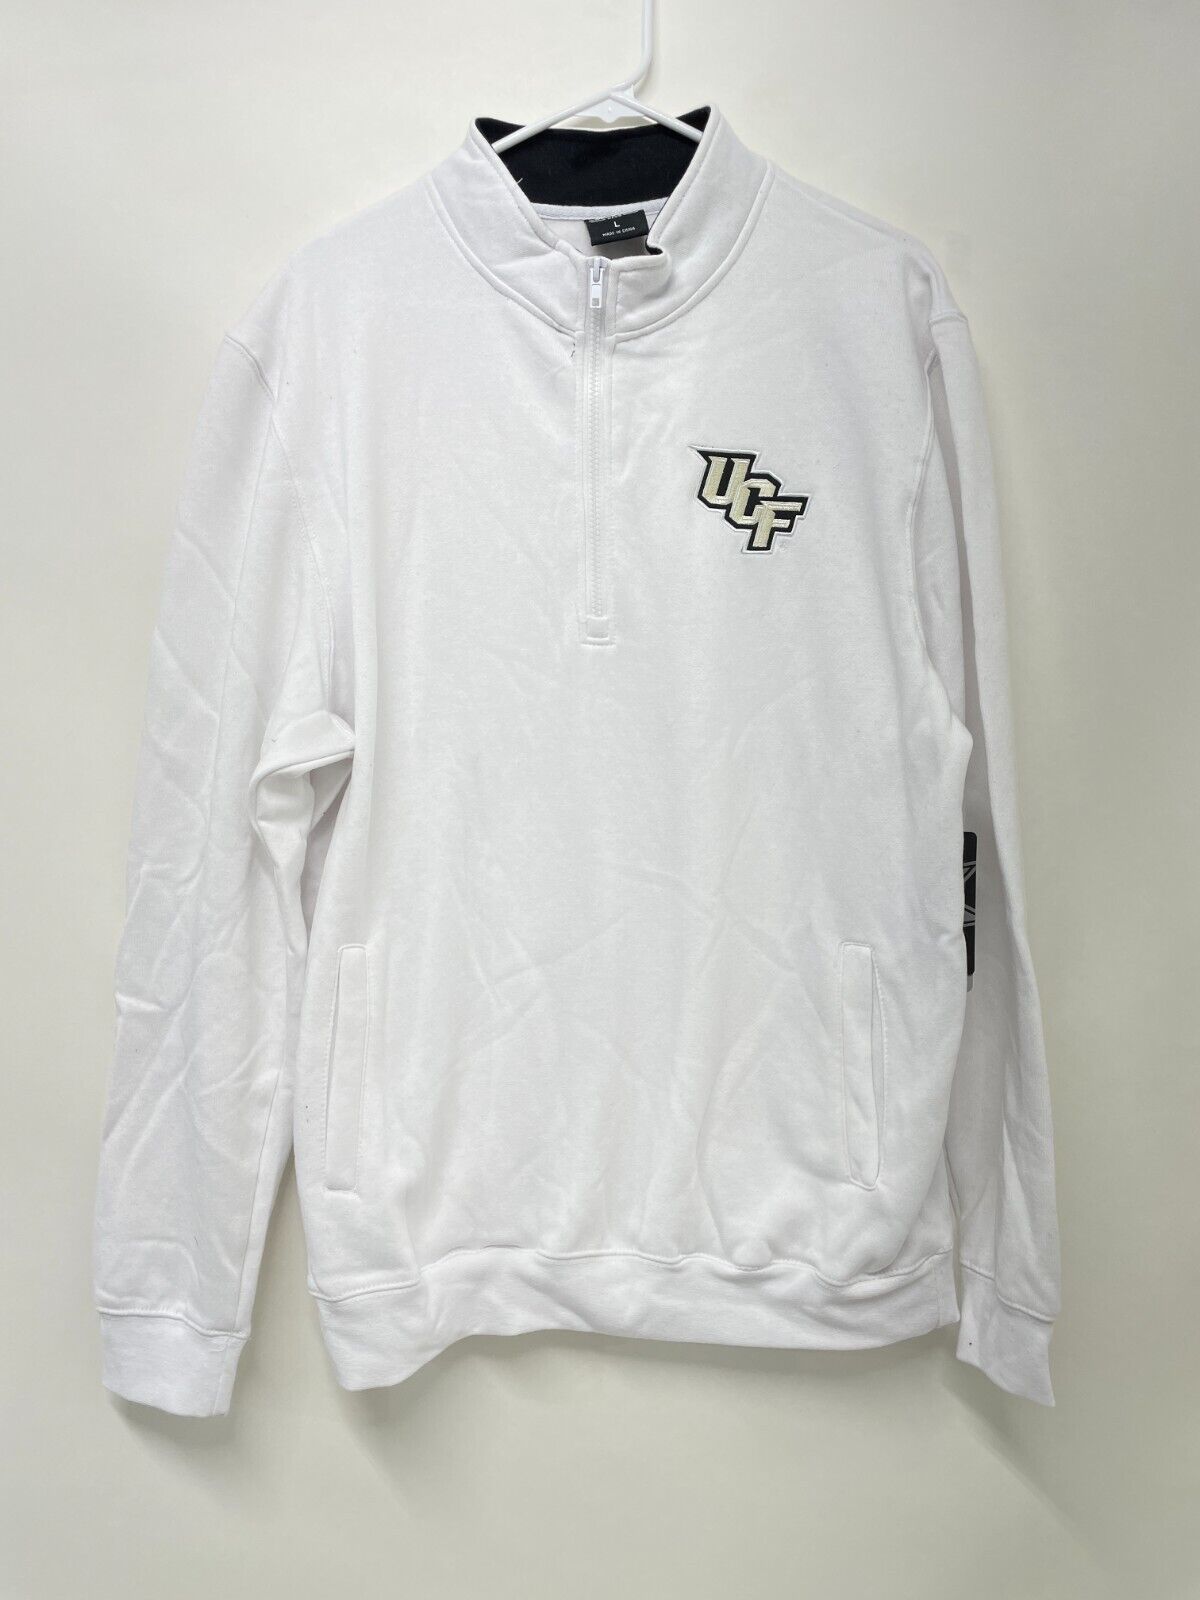 UCF Knights Colosseum Athletics L Team 1/4 Zip Jacket White Mock Neck Pullover